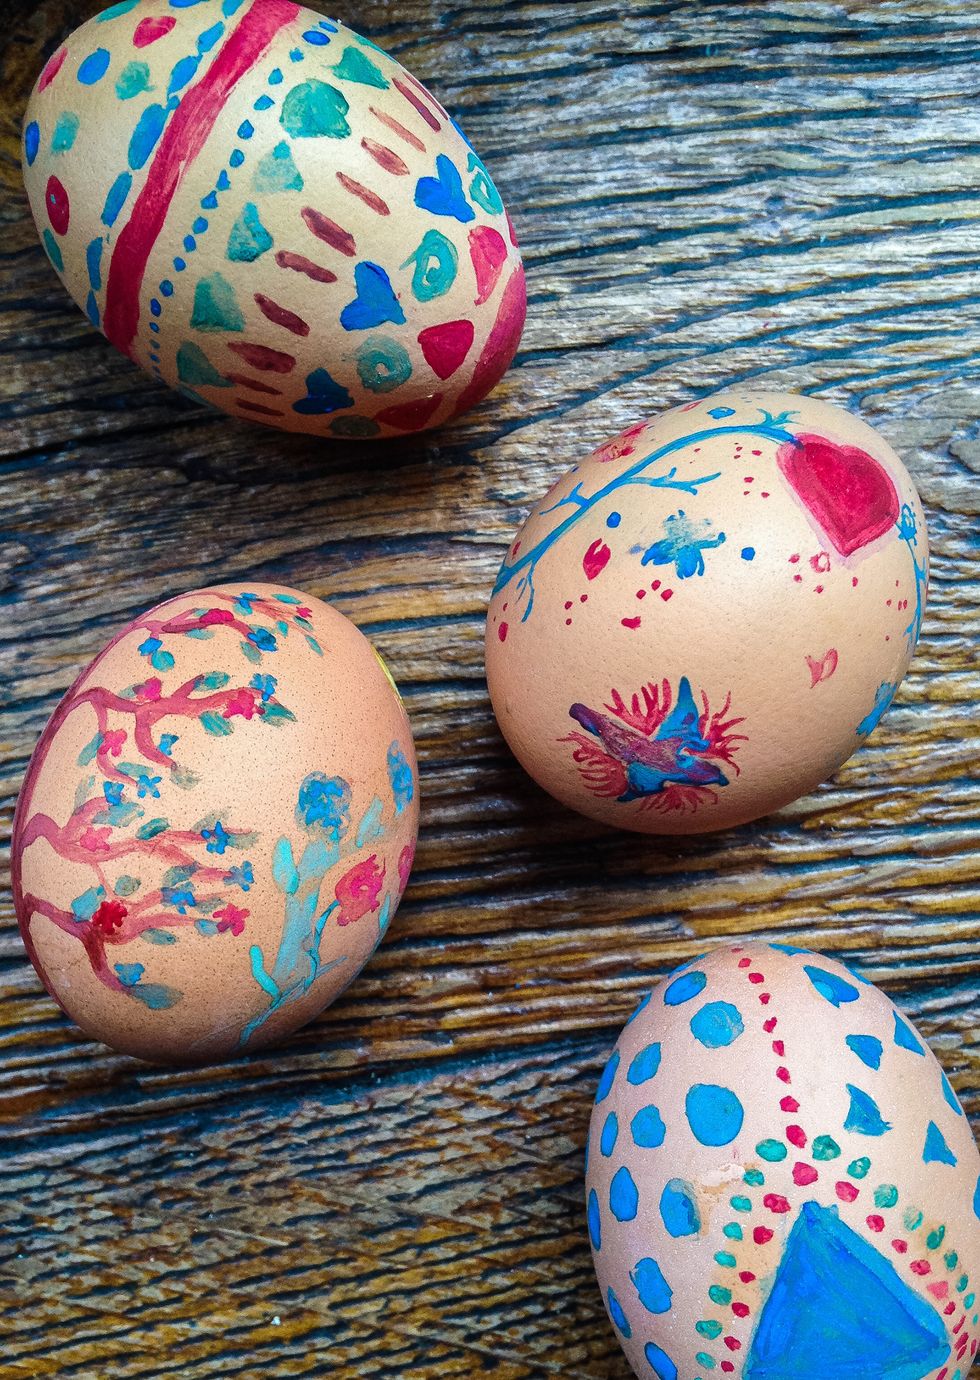 painted eggs at blanchette